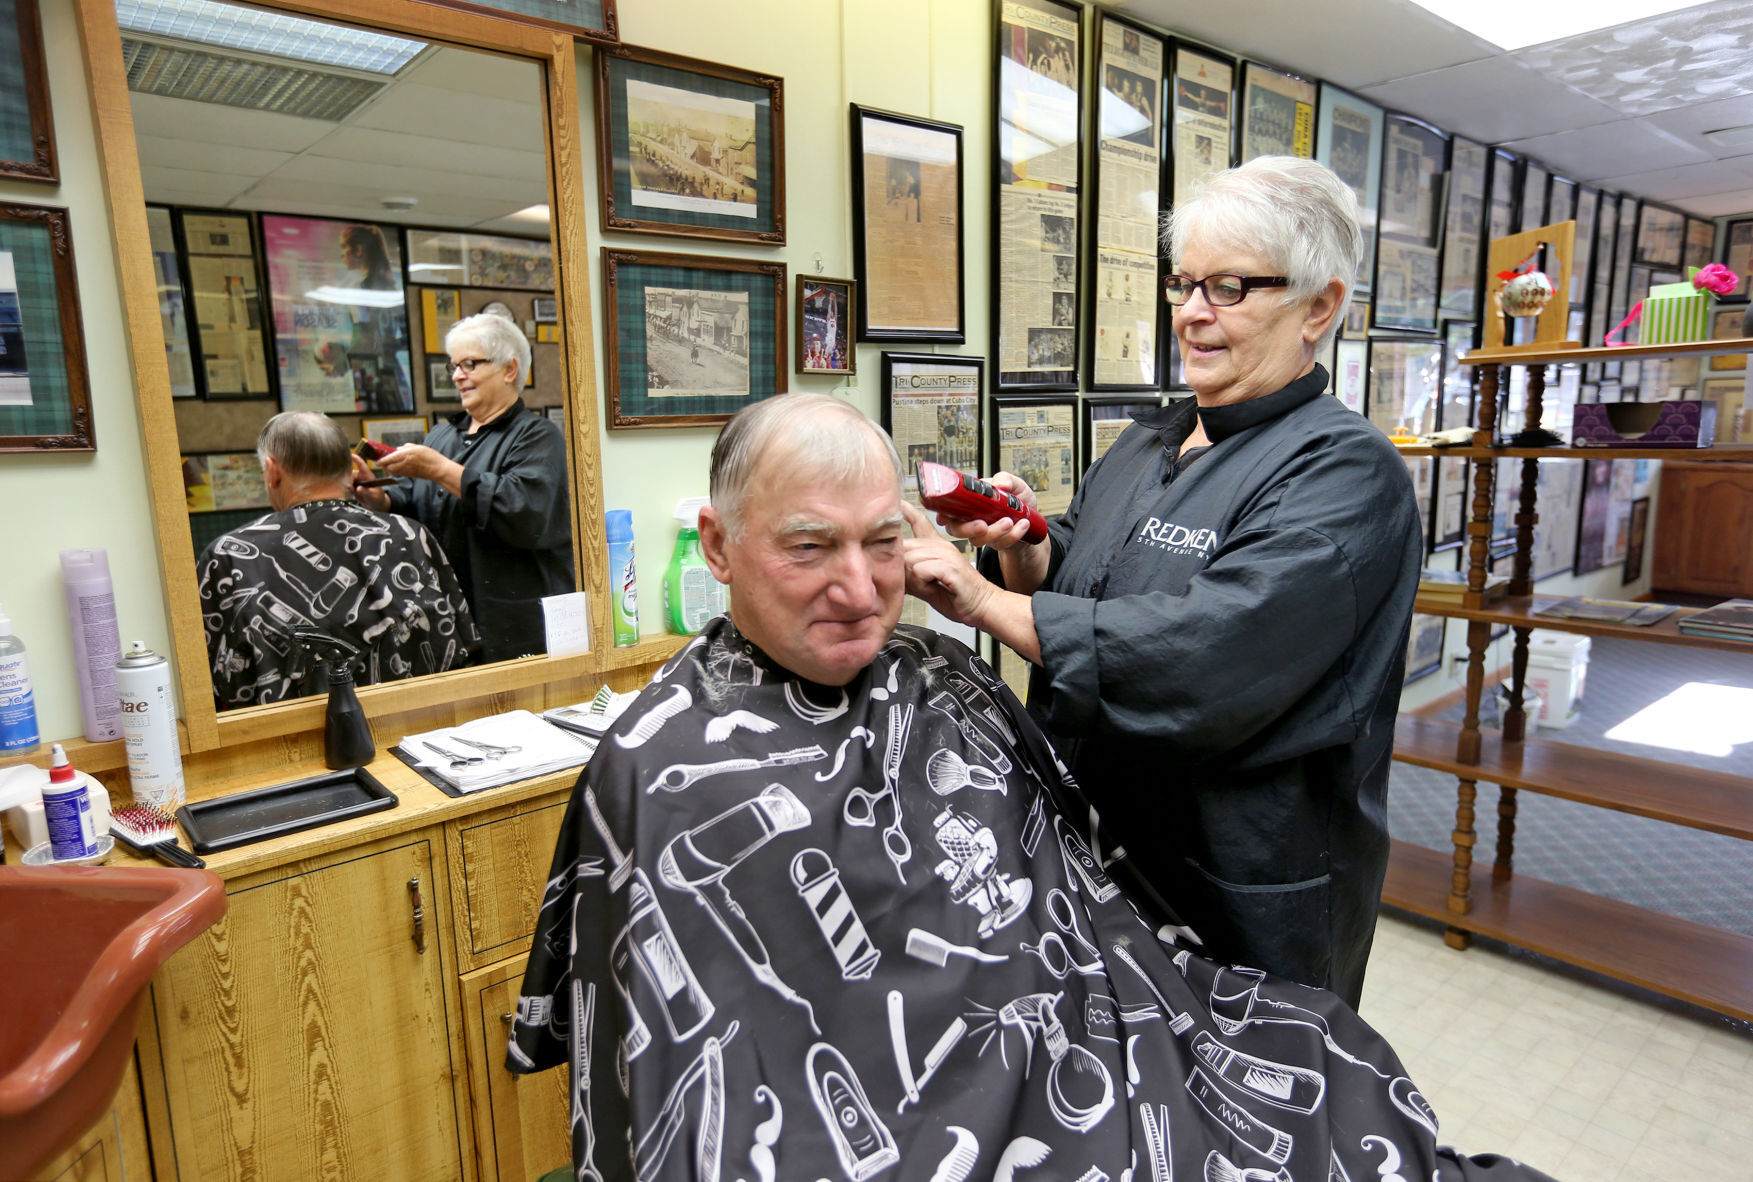 Joanie Von Glahn cuts hair for Glen Temperly, of Cuba City, Wis., at Joanie’s Hair Repair in Cuba City on Saturday. Von Glahn is retiring after 53 years in the industry.    PHOTO CREDIT: JESSICA REILLY